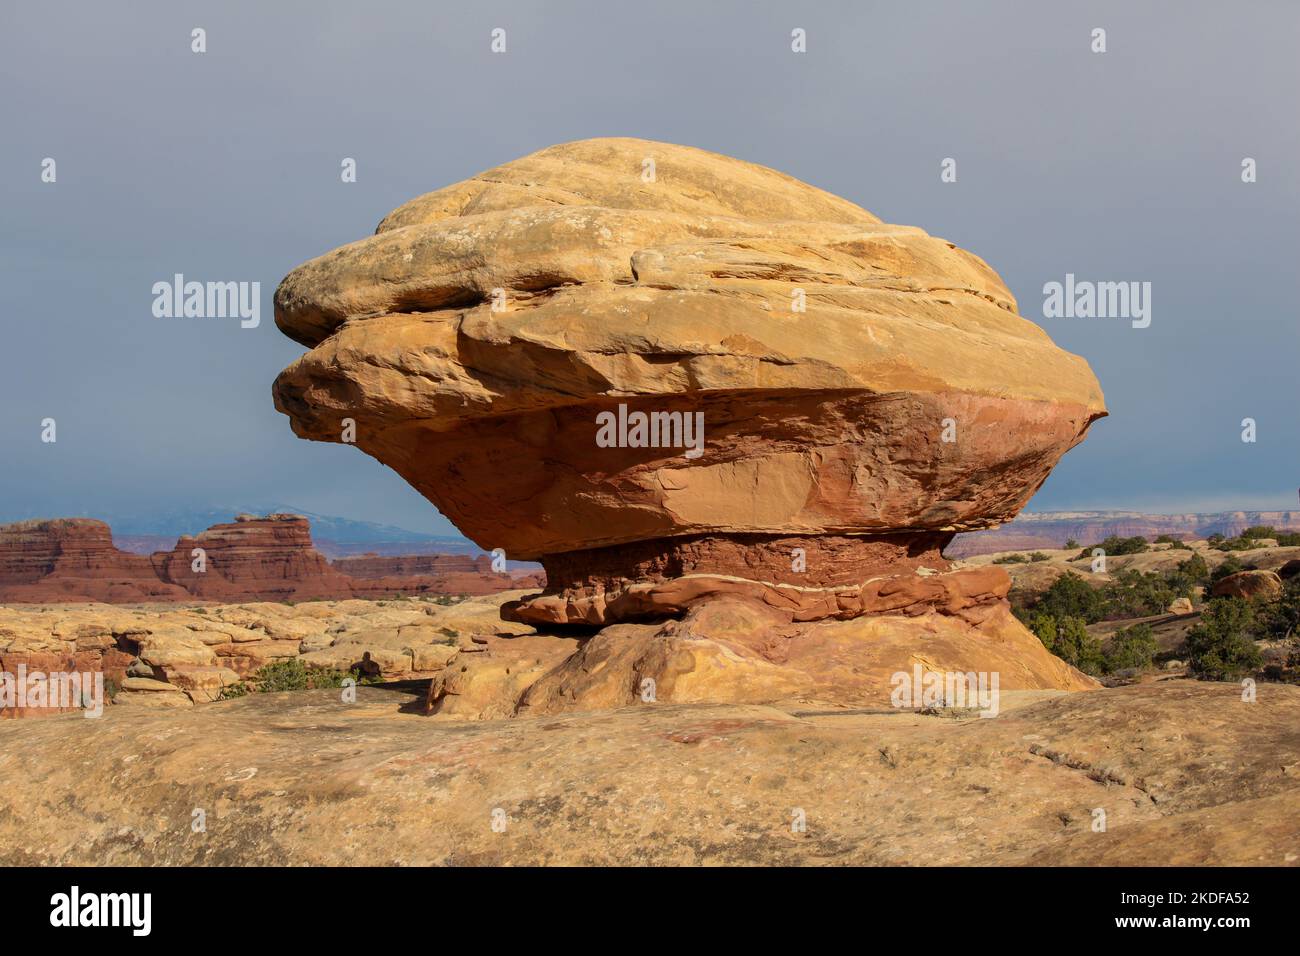 The Needles Trail in Canyonlands National Park, Utah. Stock Photo